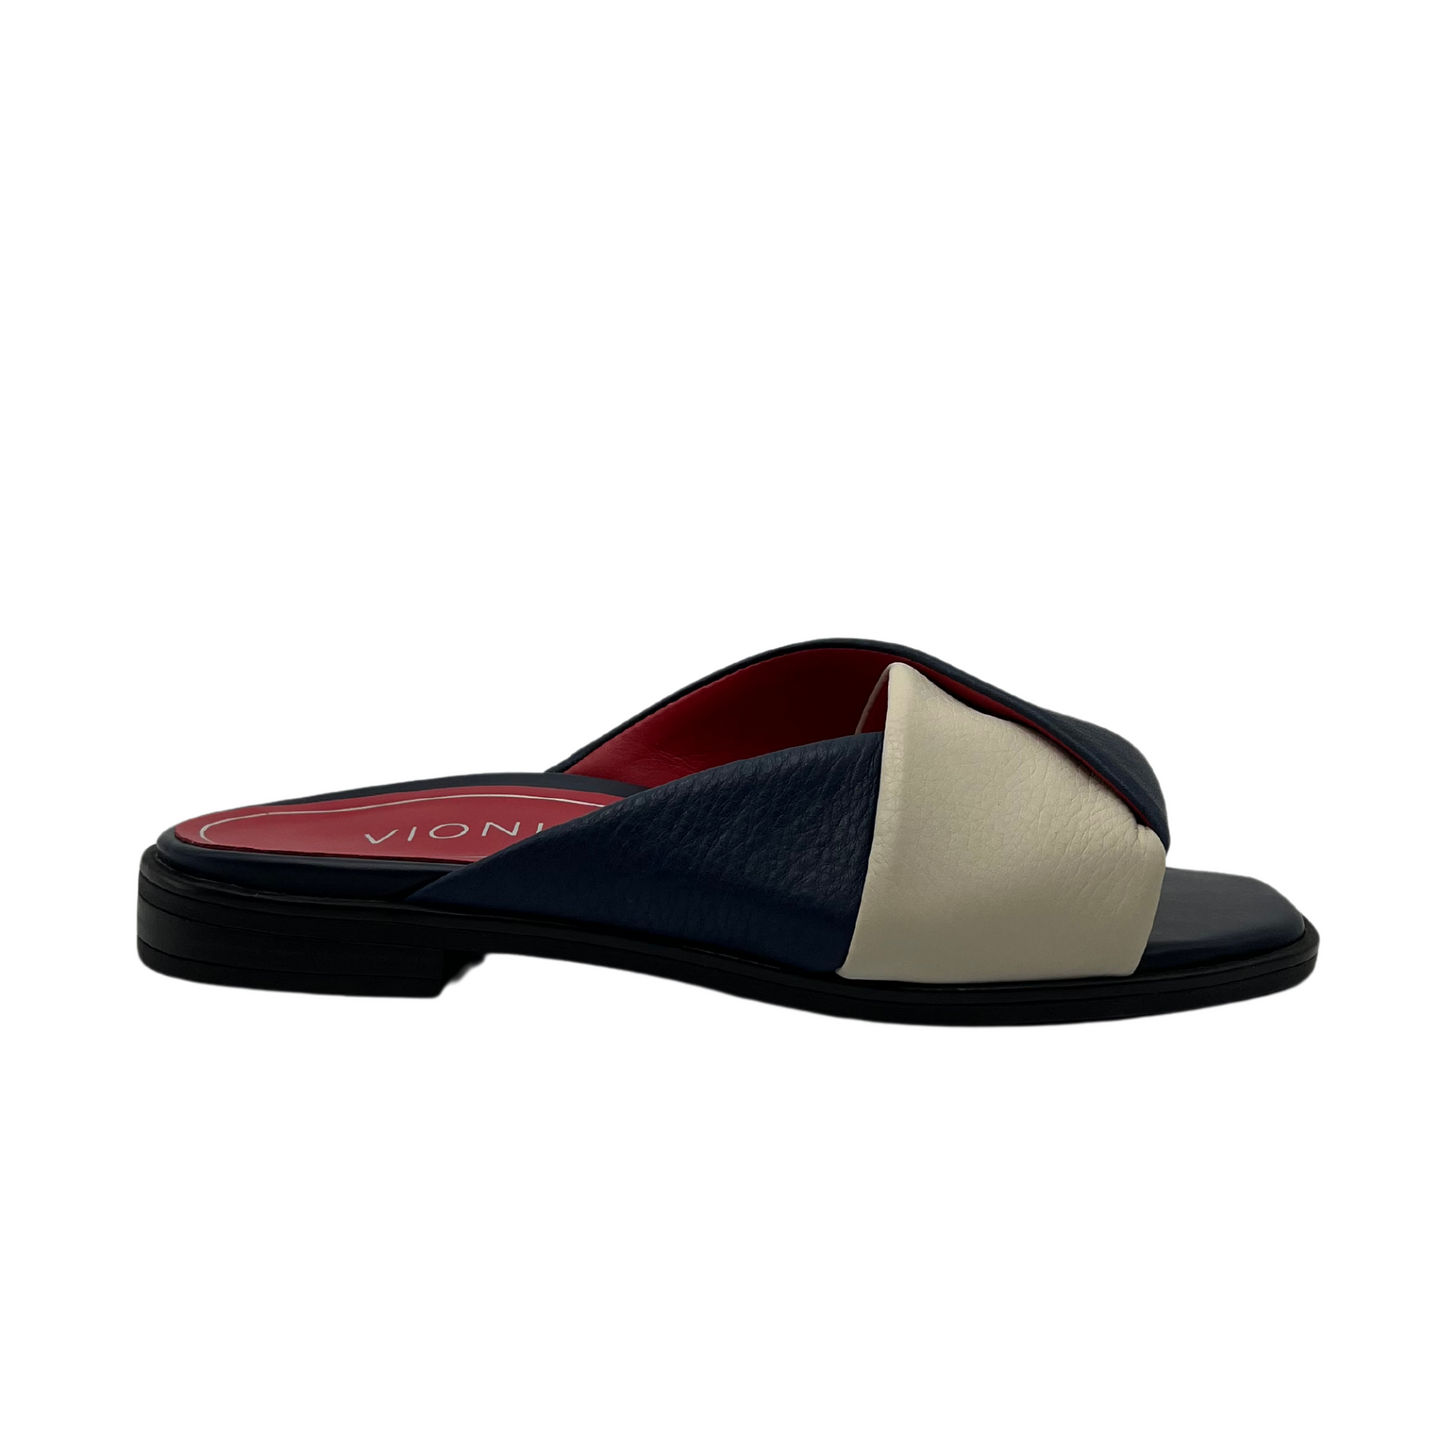 Right facing view of navy and cream leather slip on sandal with red inner lining